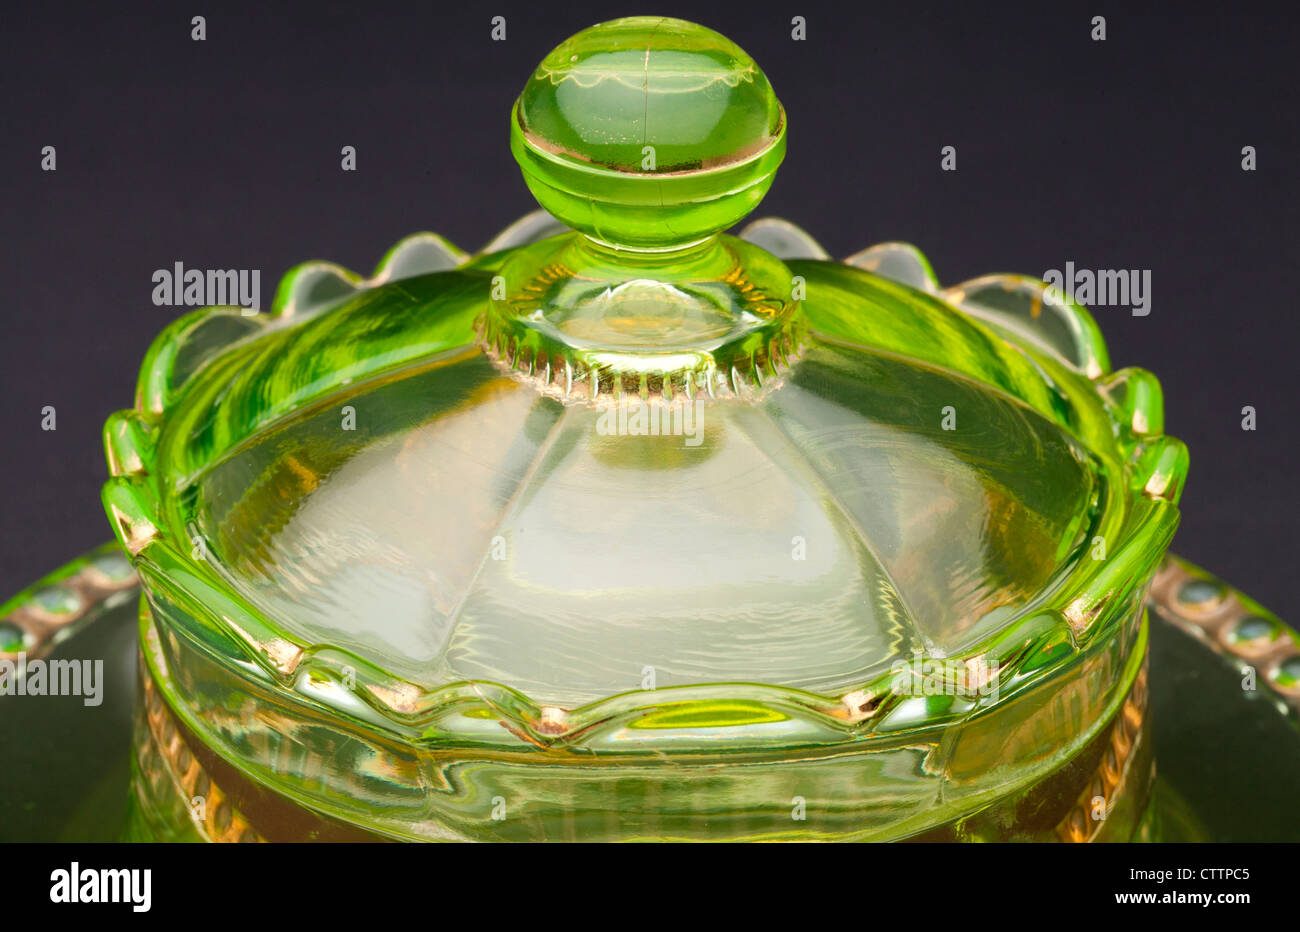 Top view of a Ranson 'gold band' Vaseline 'uranium glass' round covered butter dish produced by the Riverside Glass Co. in 1899. Stock Photo